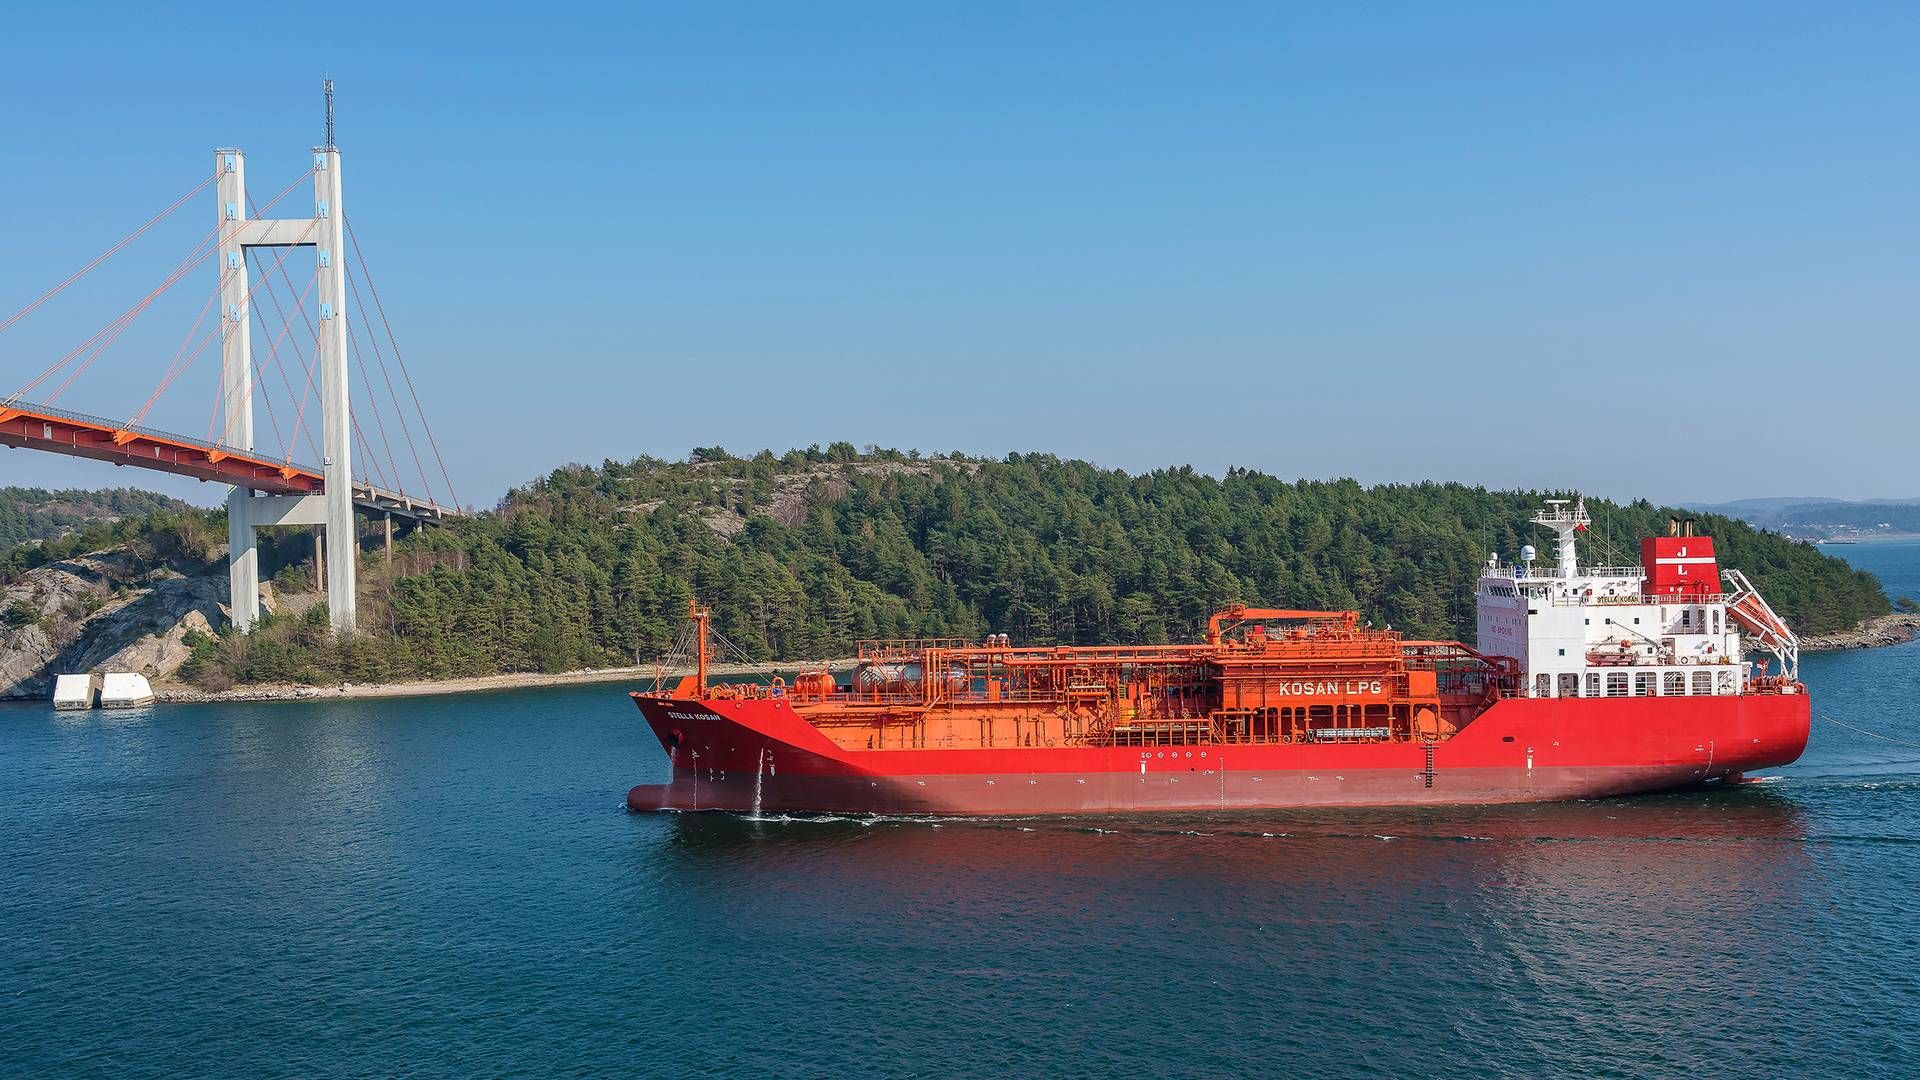 BW Epic Kosan owns and operates the world's largest fleet of gas tankers, transporting LPG, petrochemicals, and specialty gases. | Photo: Pr / J. Lauritzen